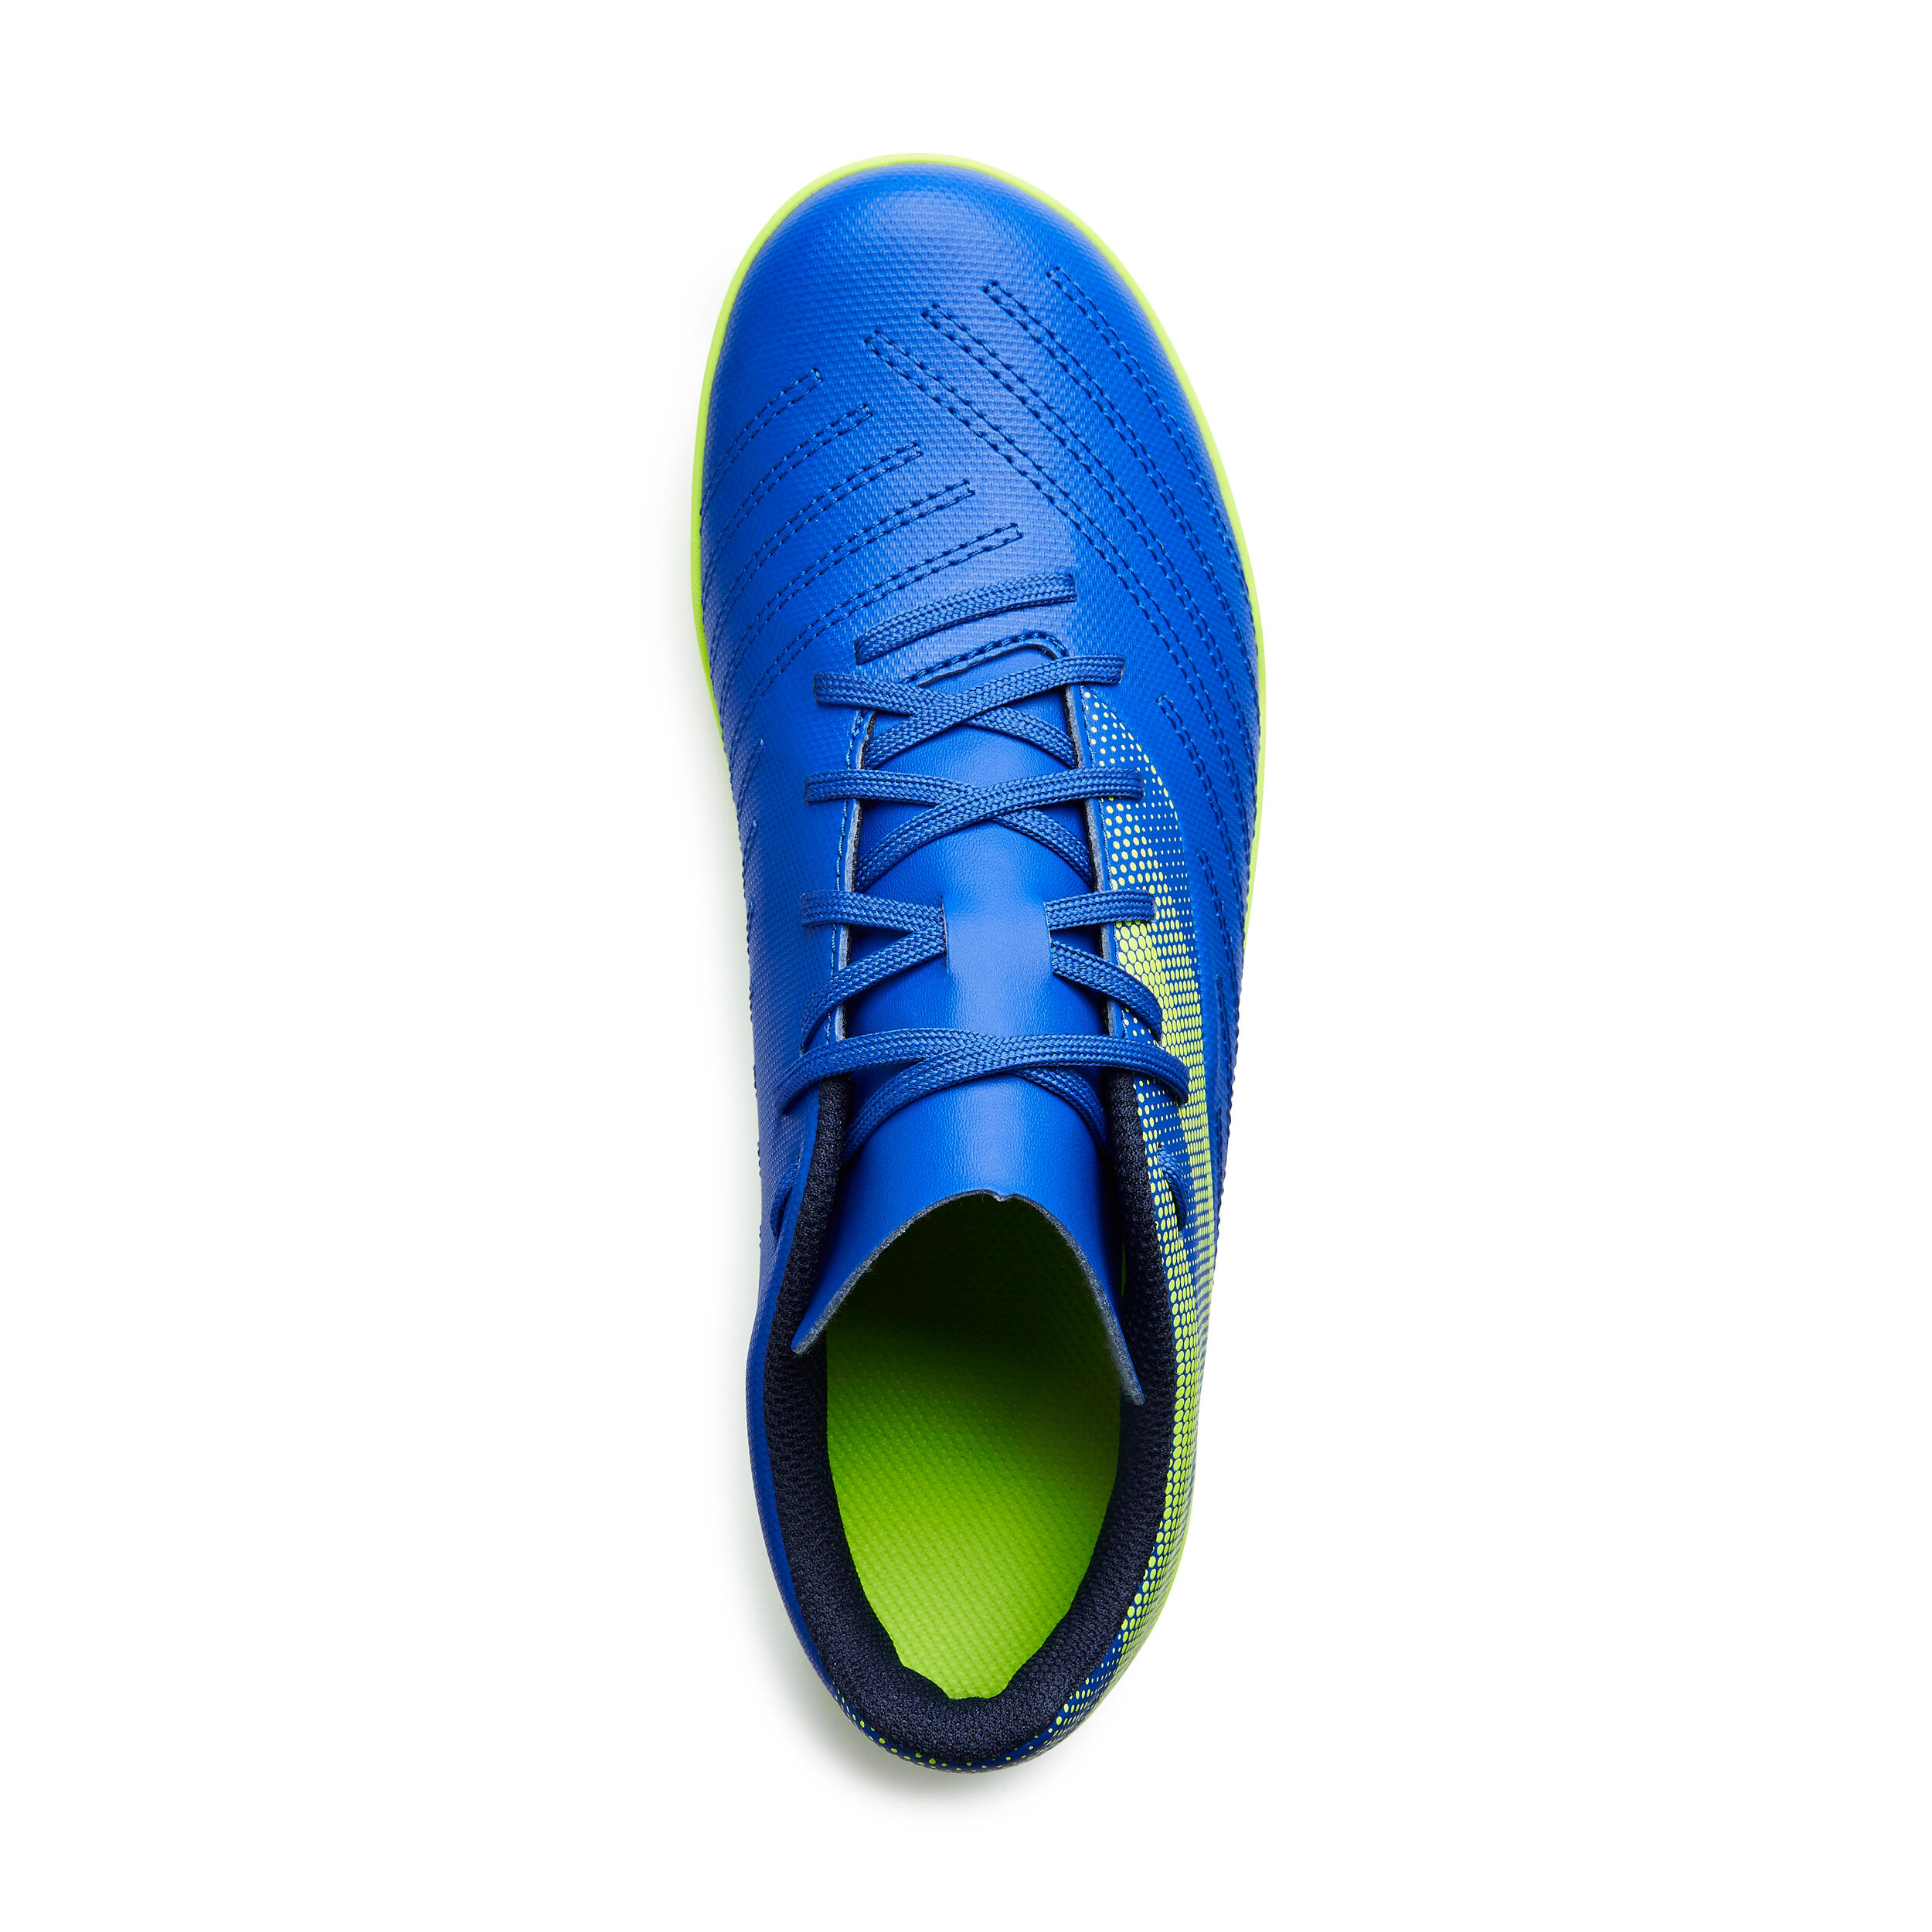 Kids' Dry Pitch Lace-Up Football Boots Agility 140 FG - Blue/Yellow 7/8